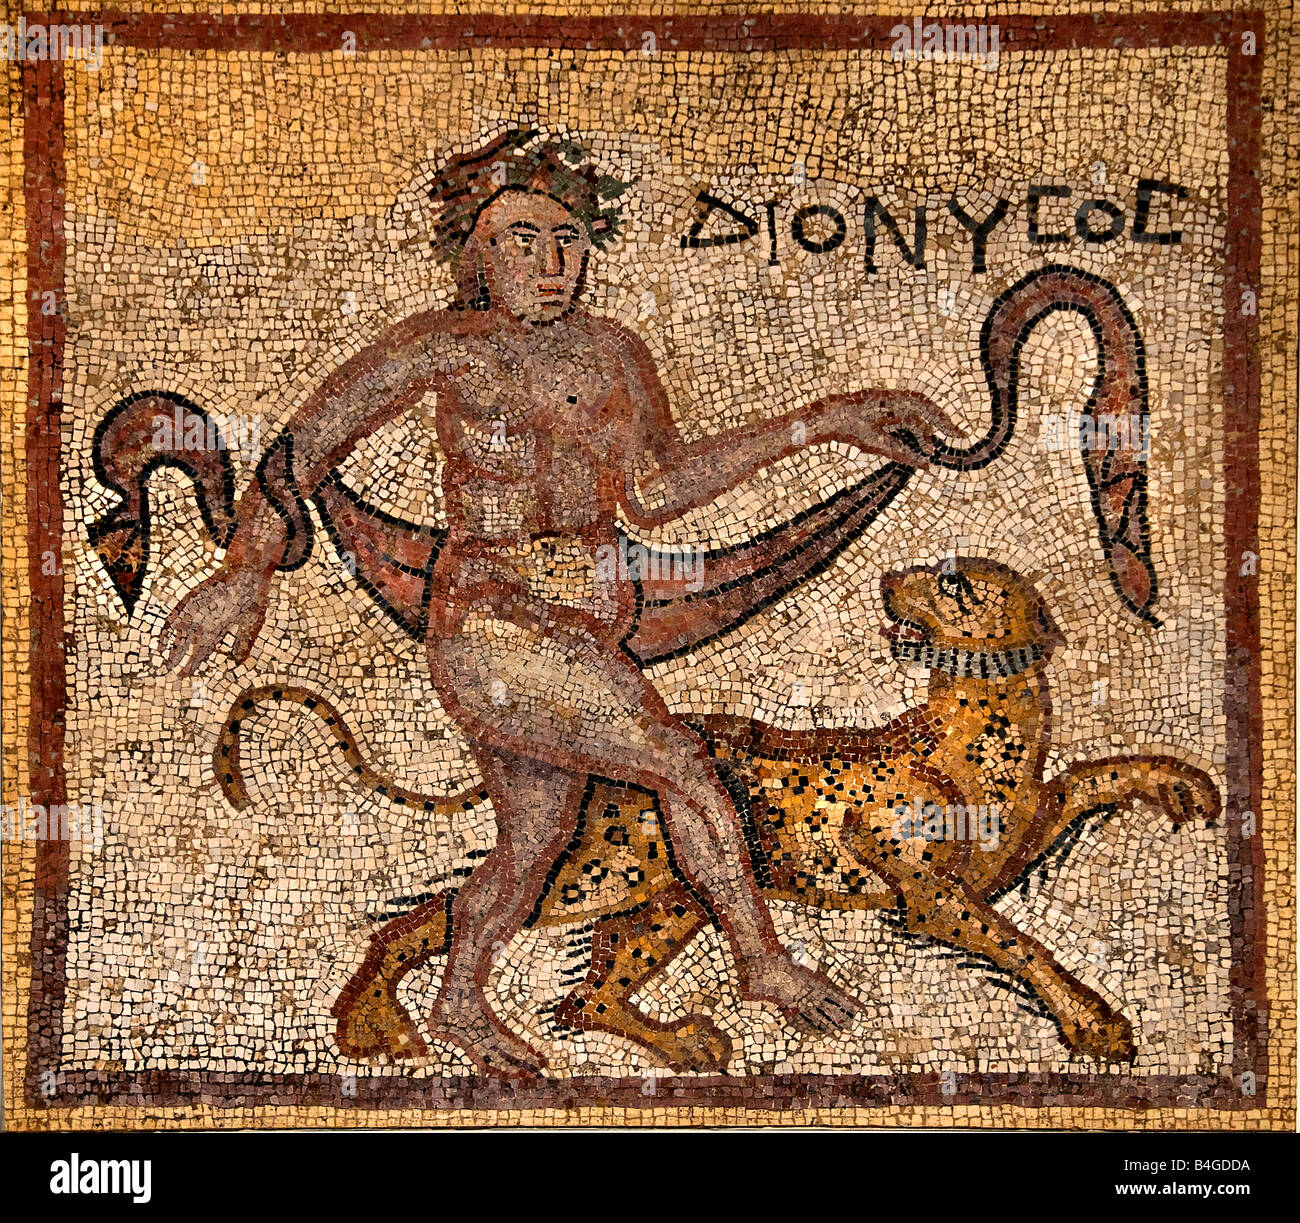 Dionysos dances with panther roman 4th century AD Stock Photo